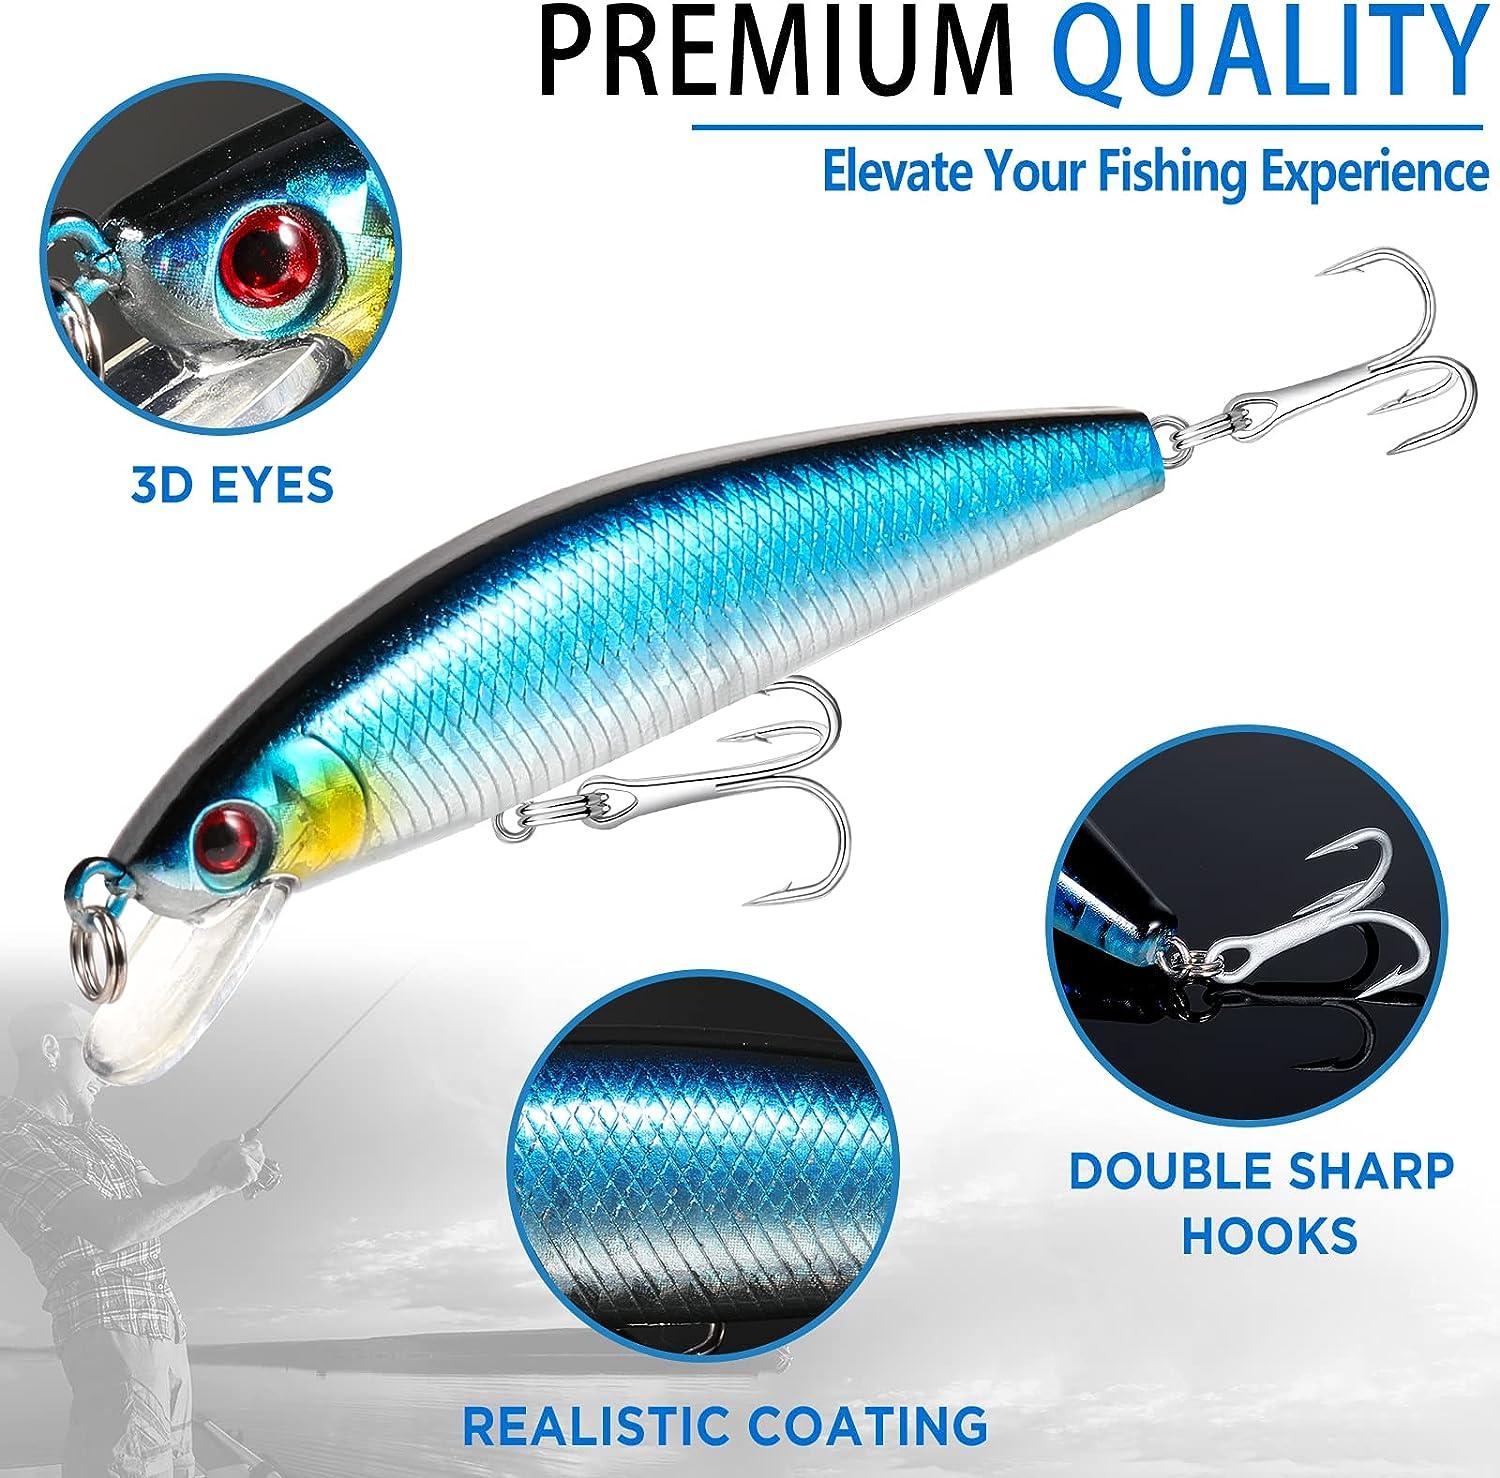 What's the Deal With This Plusinno Fishing Kit? 